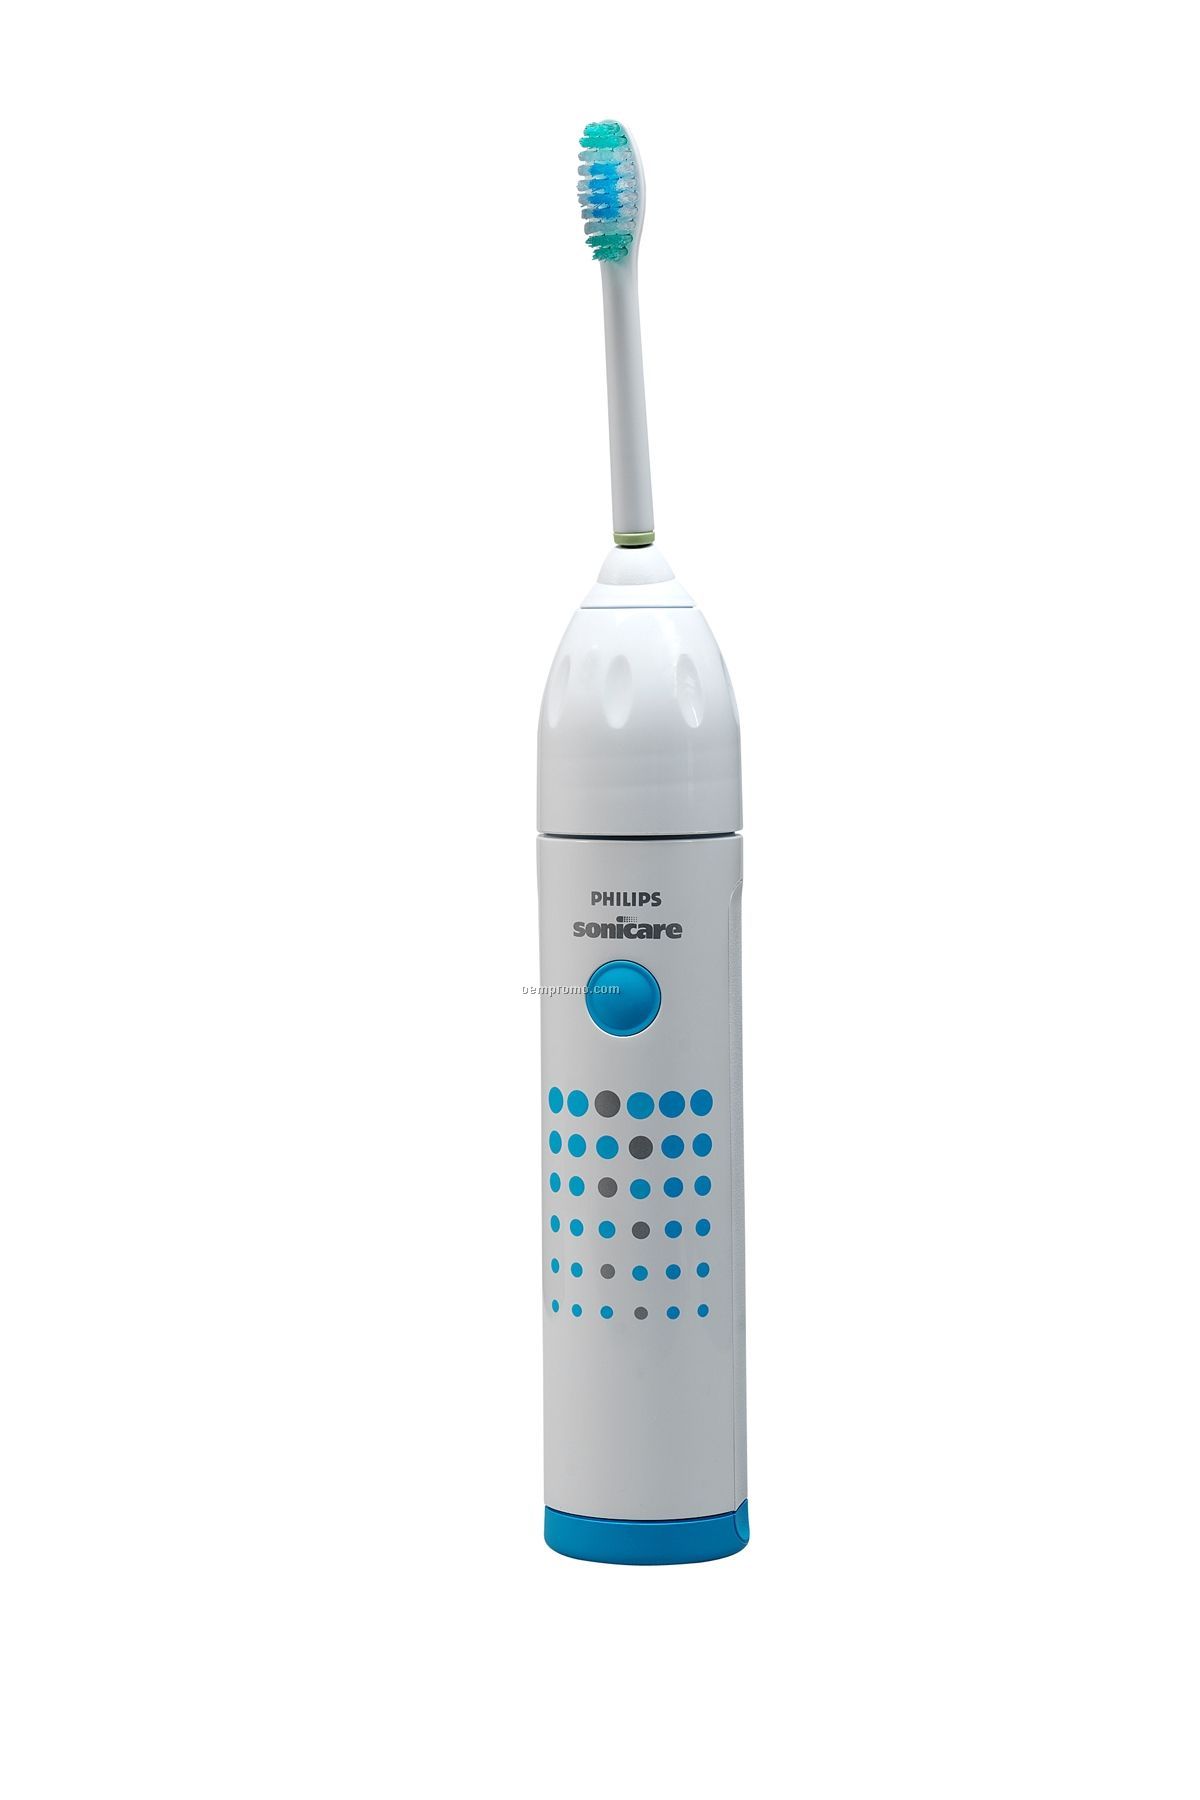 Phillips Sonicare Xtreme E3000 Toothbrush